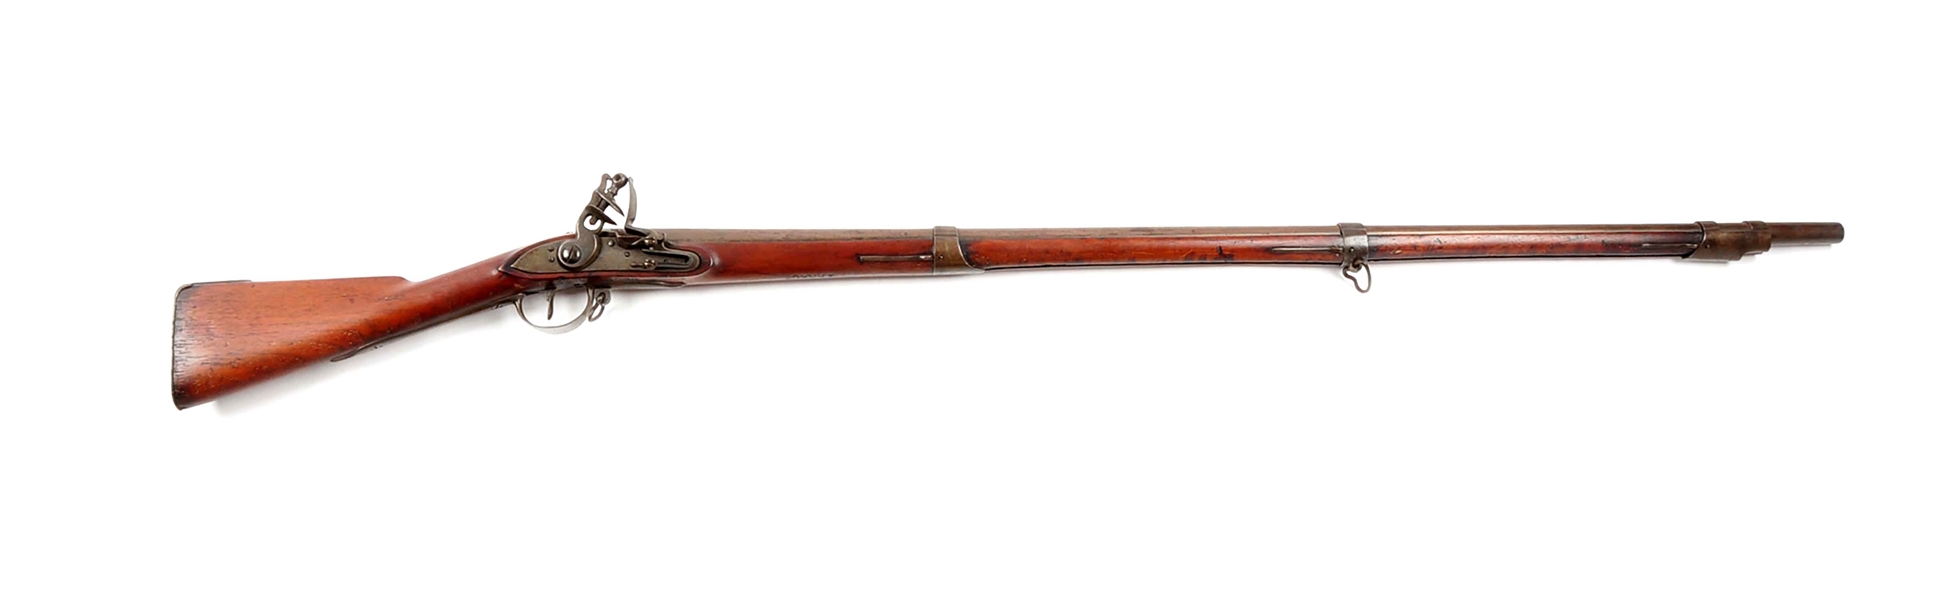 MODEL 1795 STYLE MUSKET MARKED TO THE 27TH REGIMENT OF OHIO.